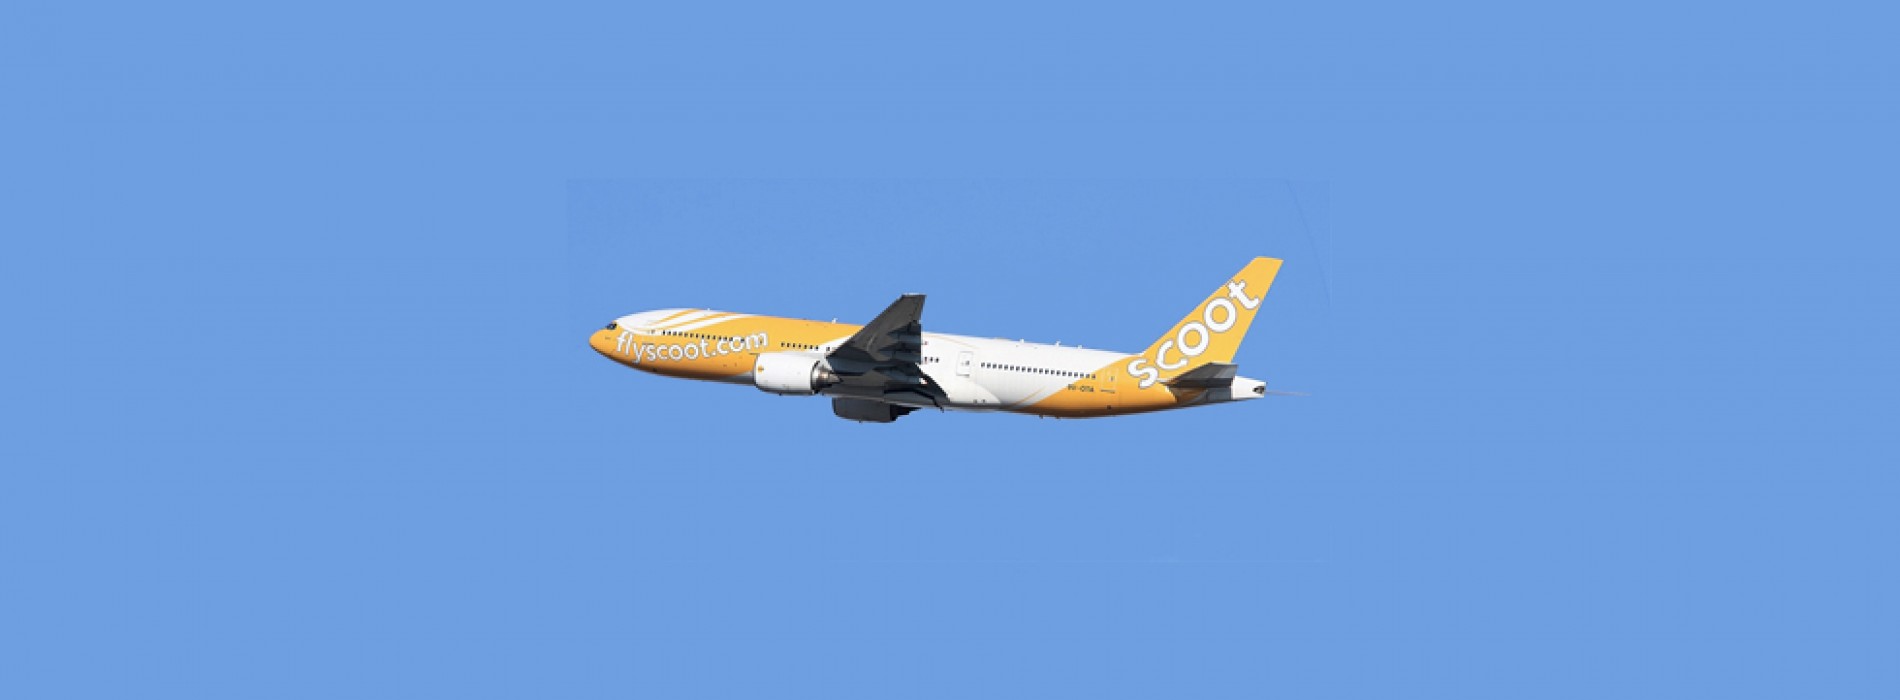 No plans to operate India-Europe long haul flights says Scoot Airlines